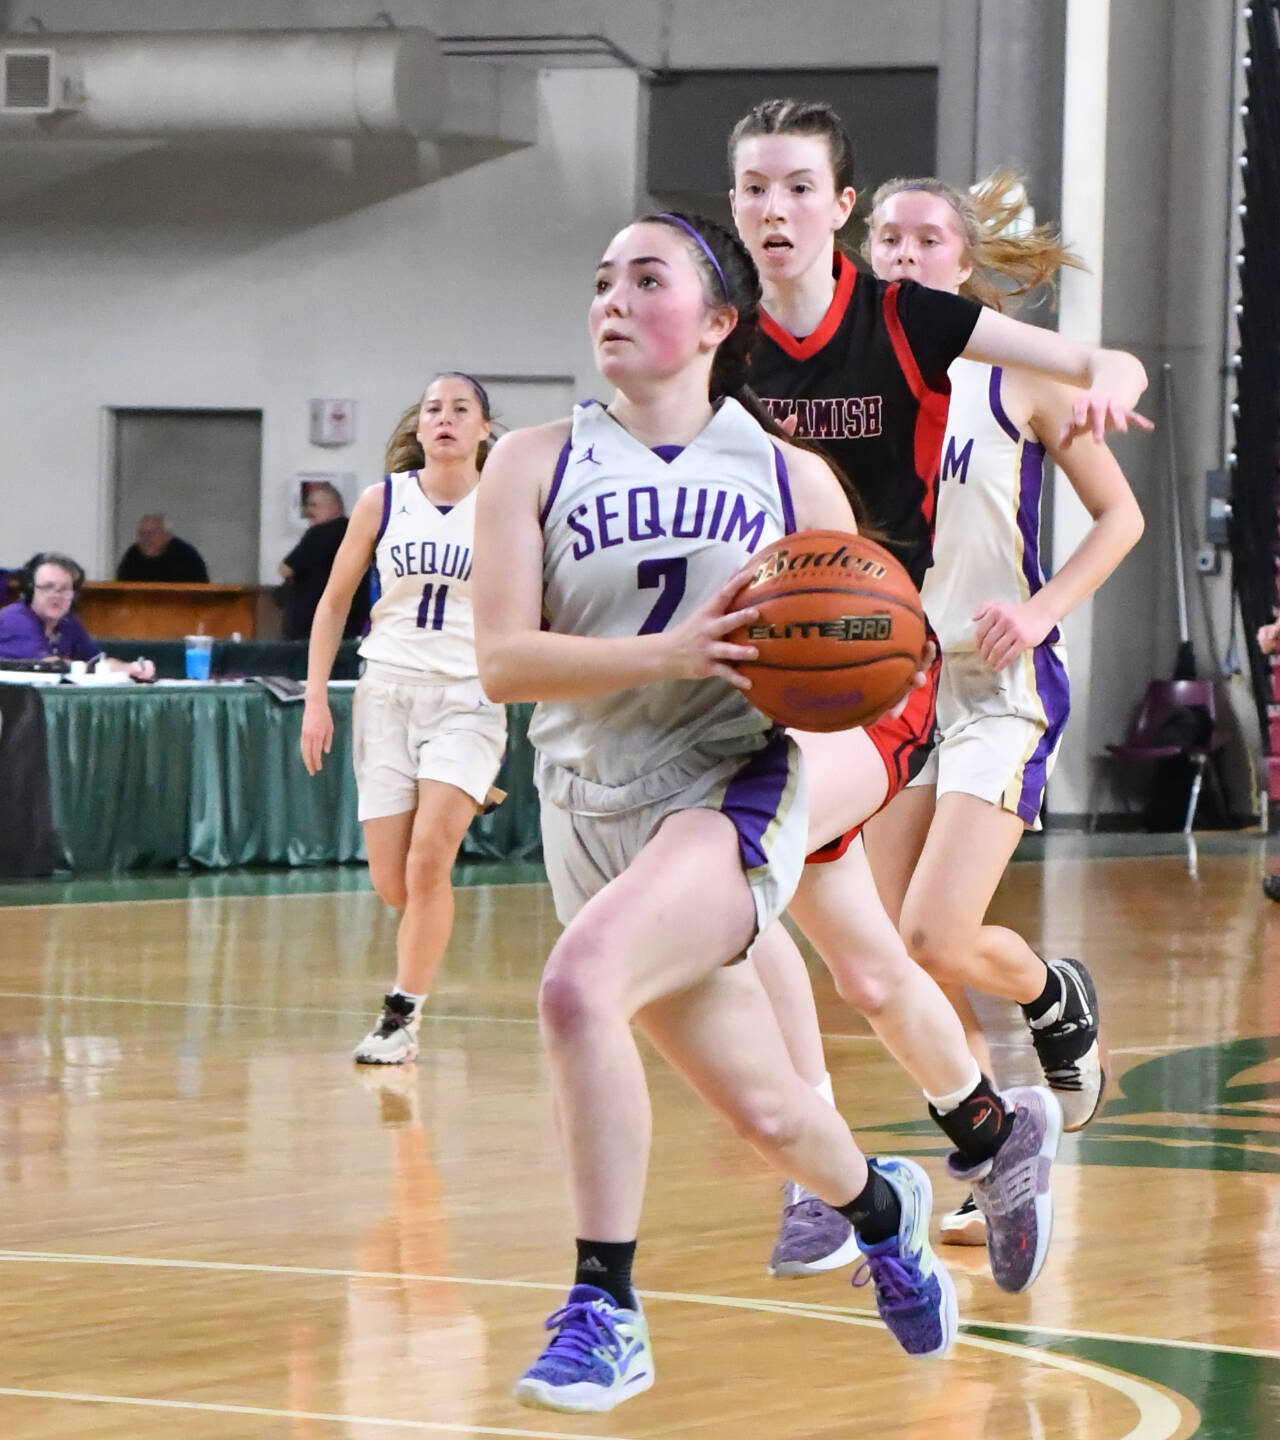 Photo by Jim Heintz / Sequim’s Hannah Bates leads a fastbreak in the first half of SHS’s 57-37 win over Sammamish at the class 2A state tournament in Yakima on March 1.